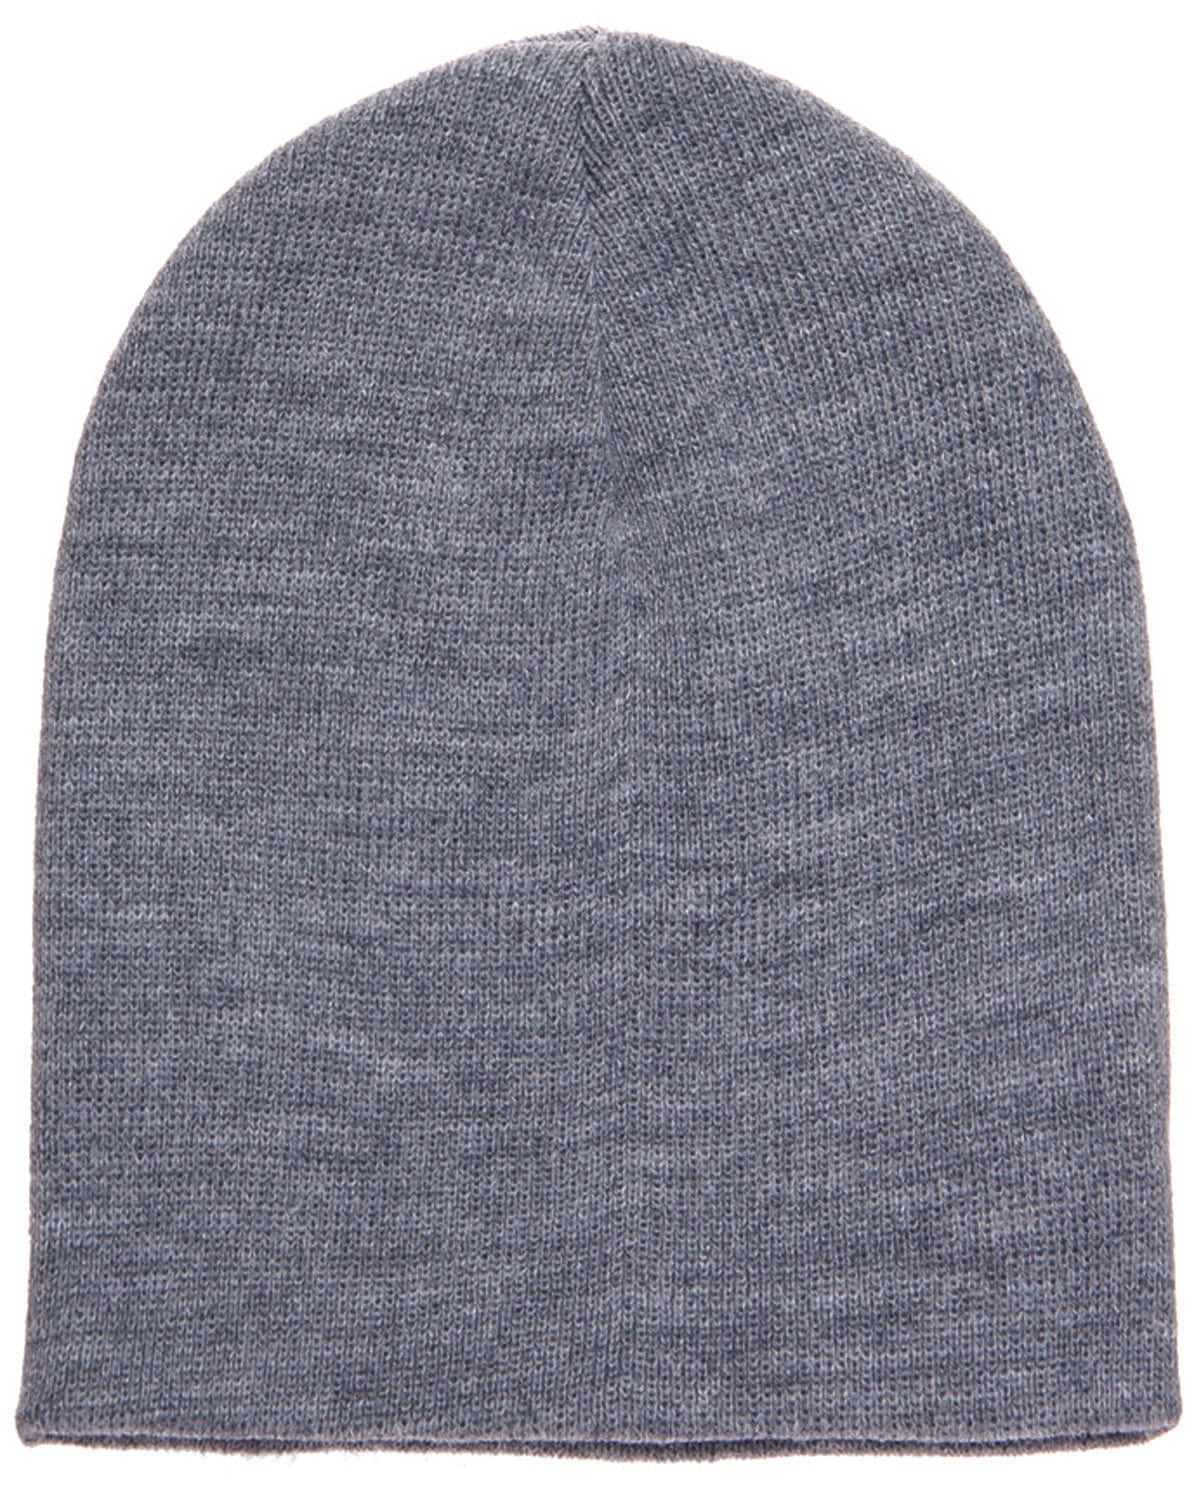 1500: Beanie Yupoong Adult Knit